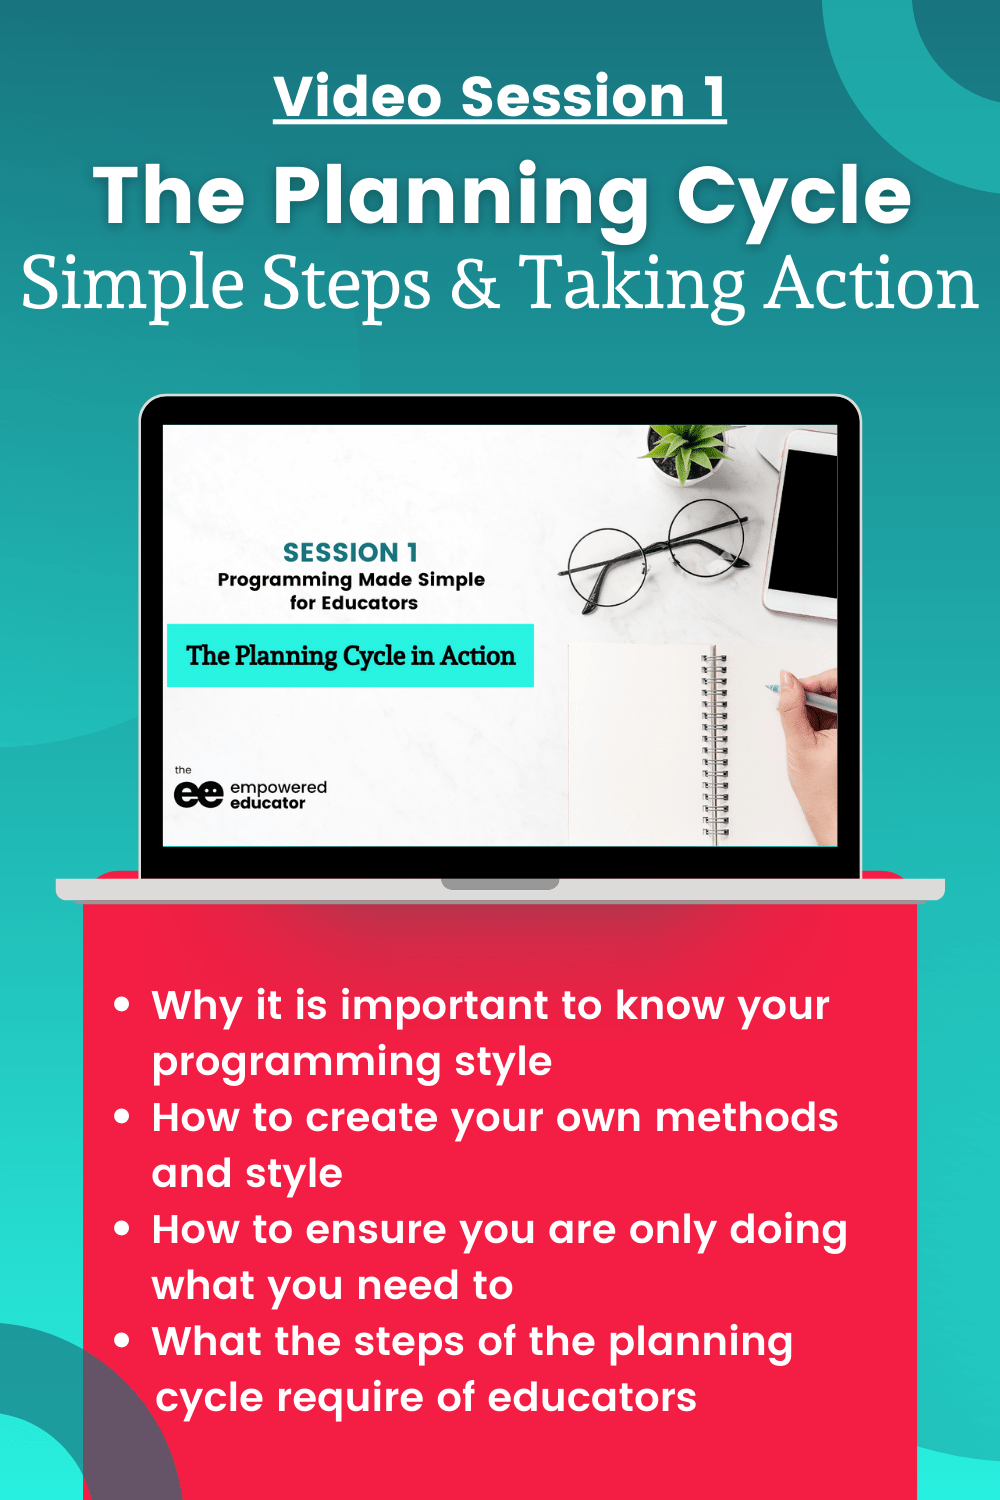 SESSION 1 - SIMPLIFY YOUR PLANNING CYCLE PROCESS